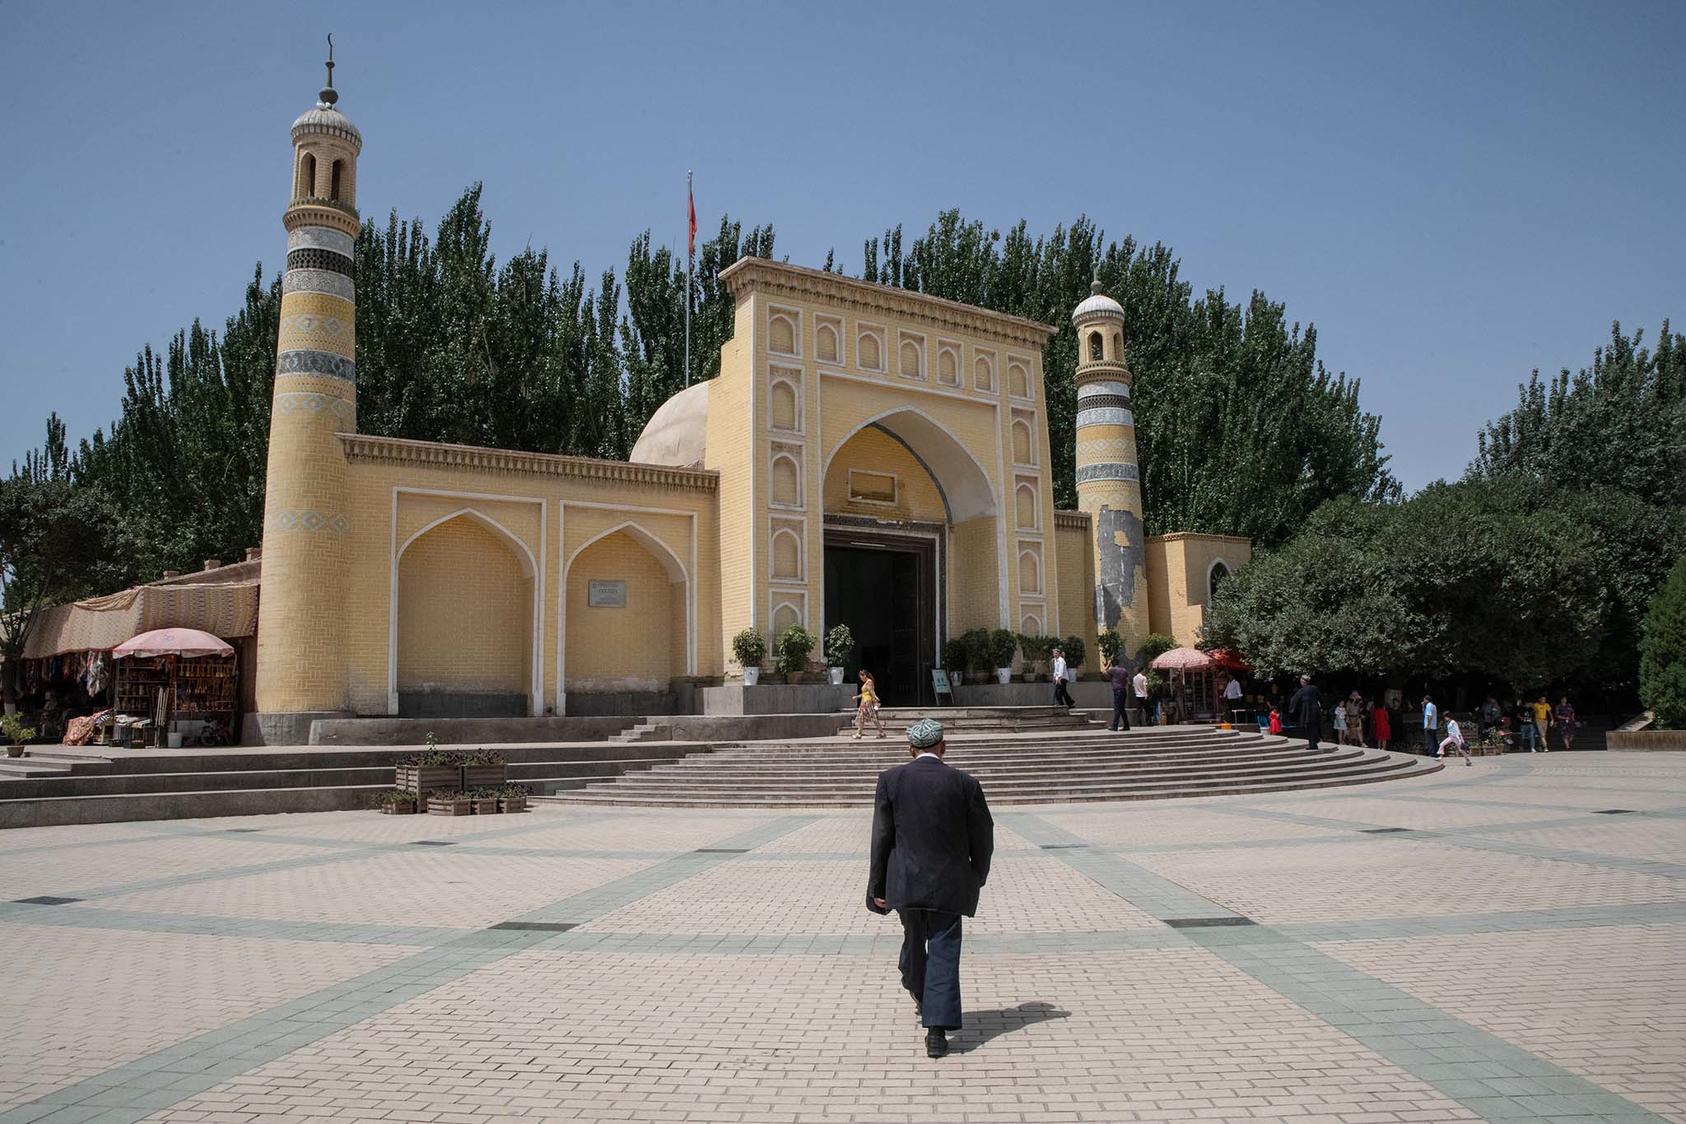 A Uyghur man heading to a mosque in Kashgar, Xinjiang, on Aug. 9, 2019. Thousands of mosques, shrines and other Islamic religious sites have been demolished in Xinjiang since 2017. (The New York Times)